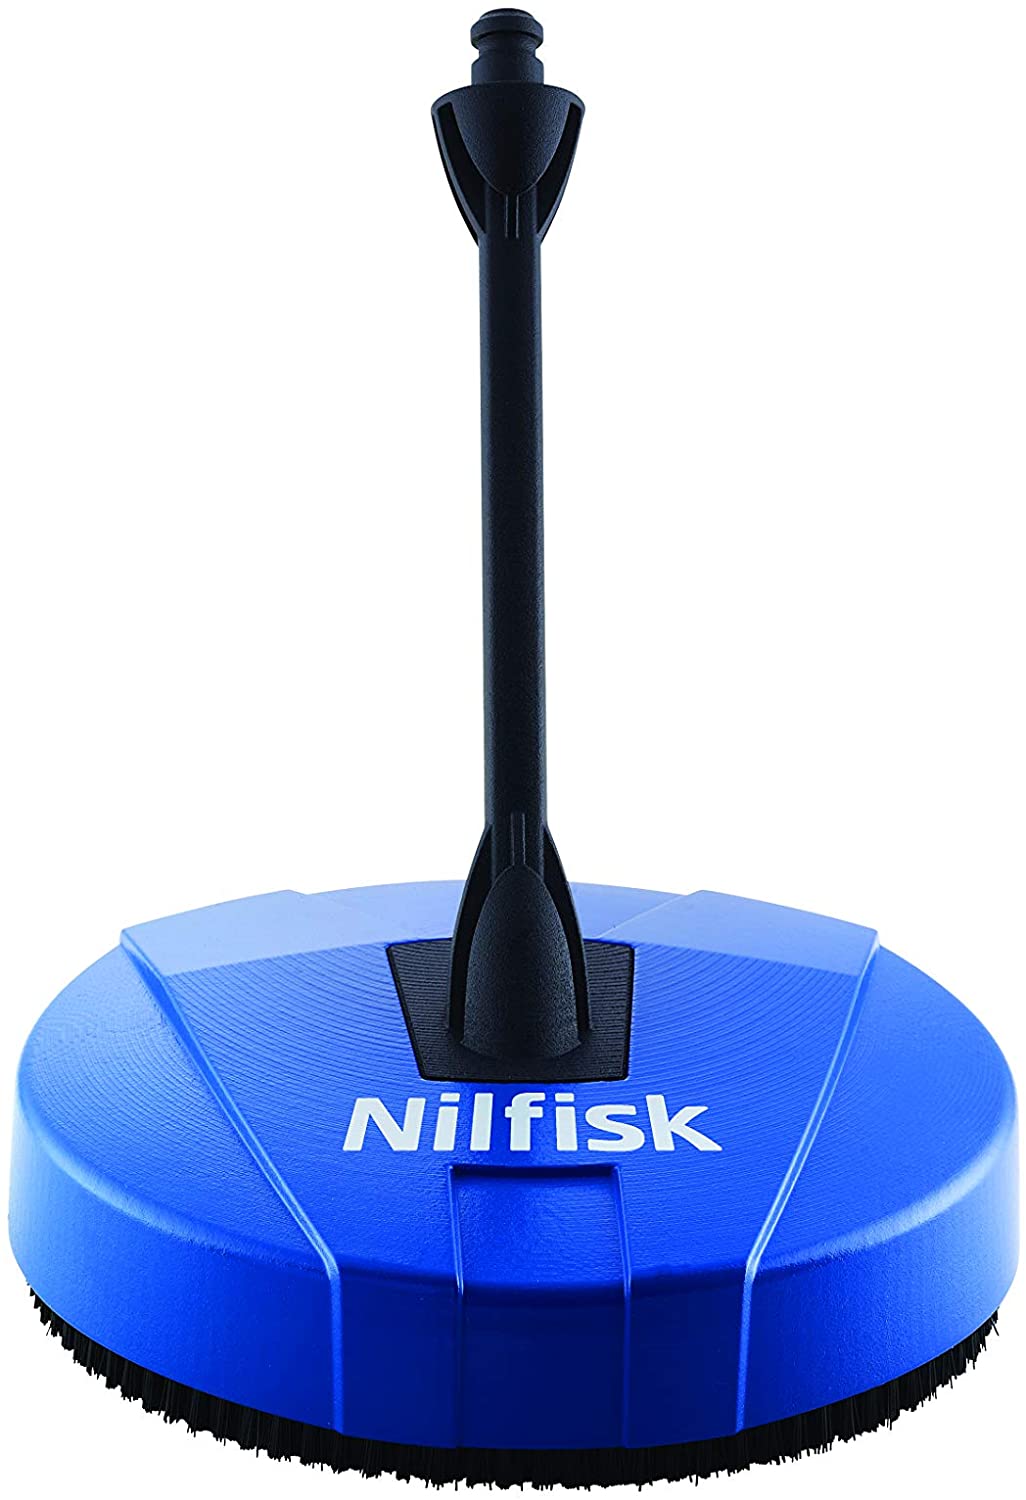 Nilfisk Compact patio cleaner (128500700)         